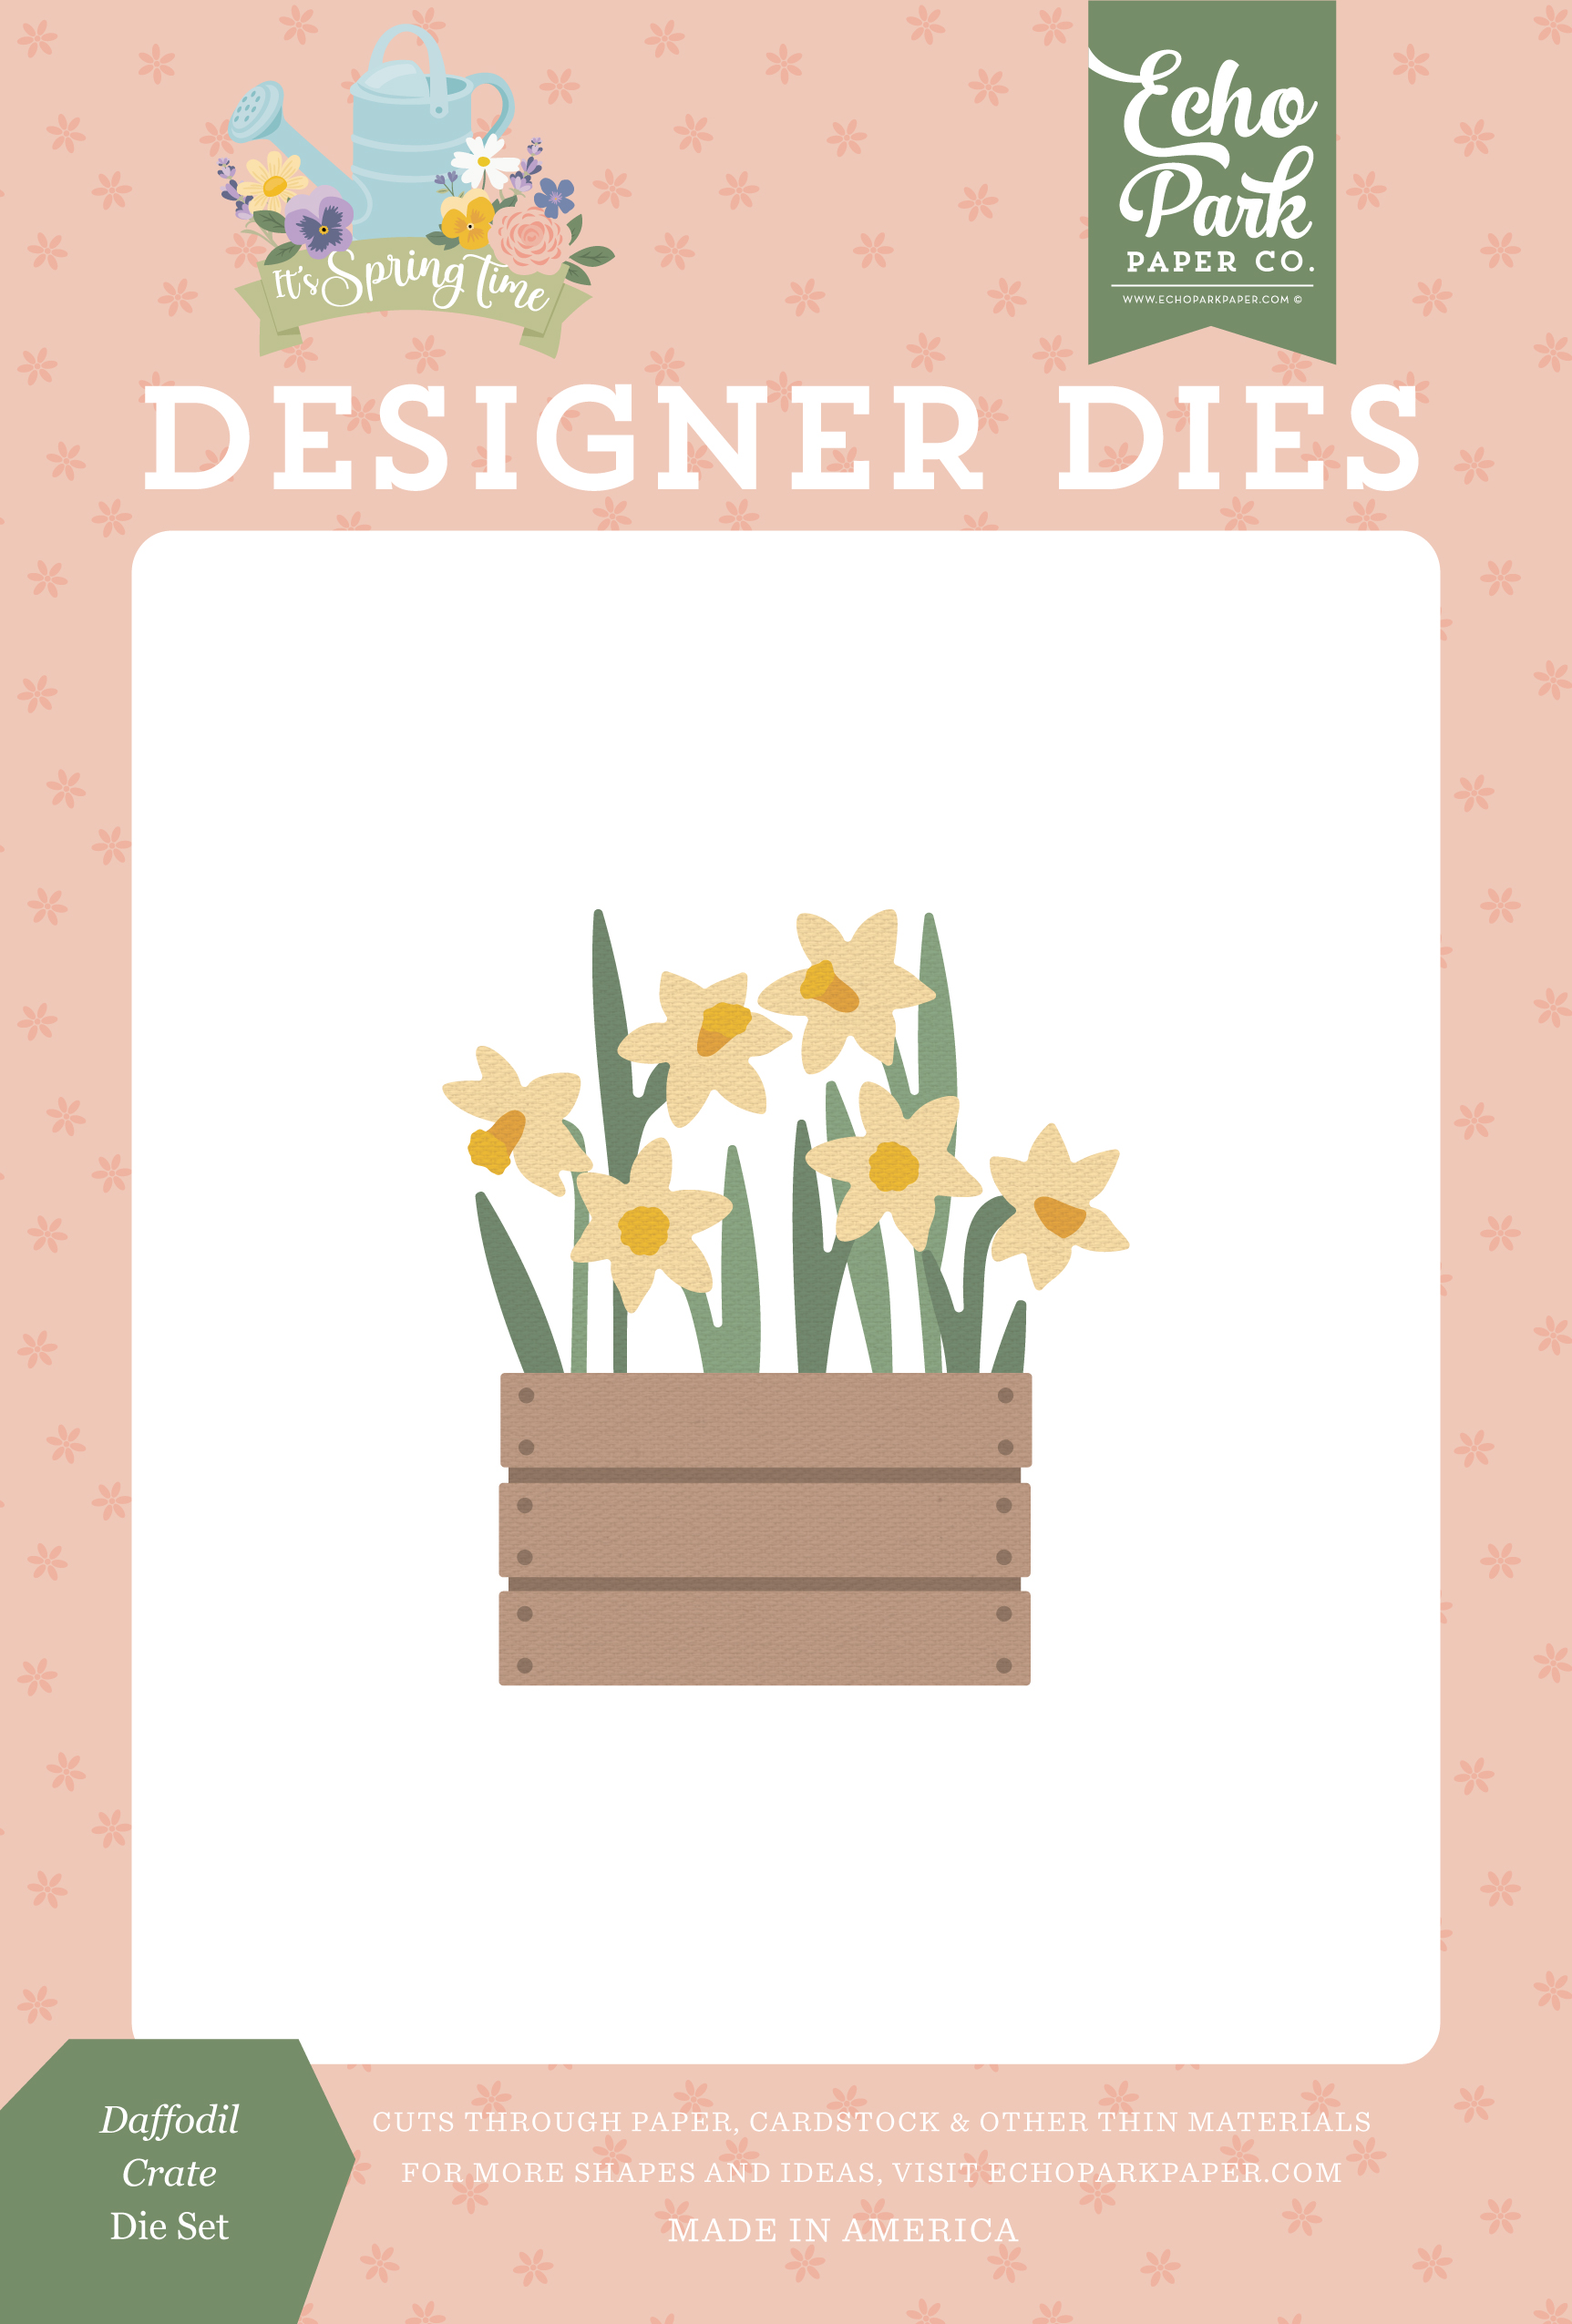 It’s Spring Time: Daffodil Crate Die Set